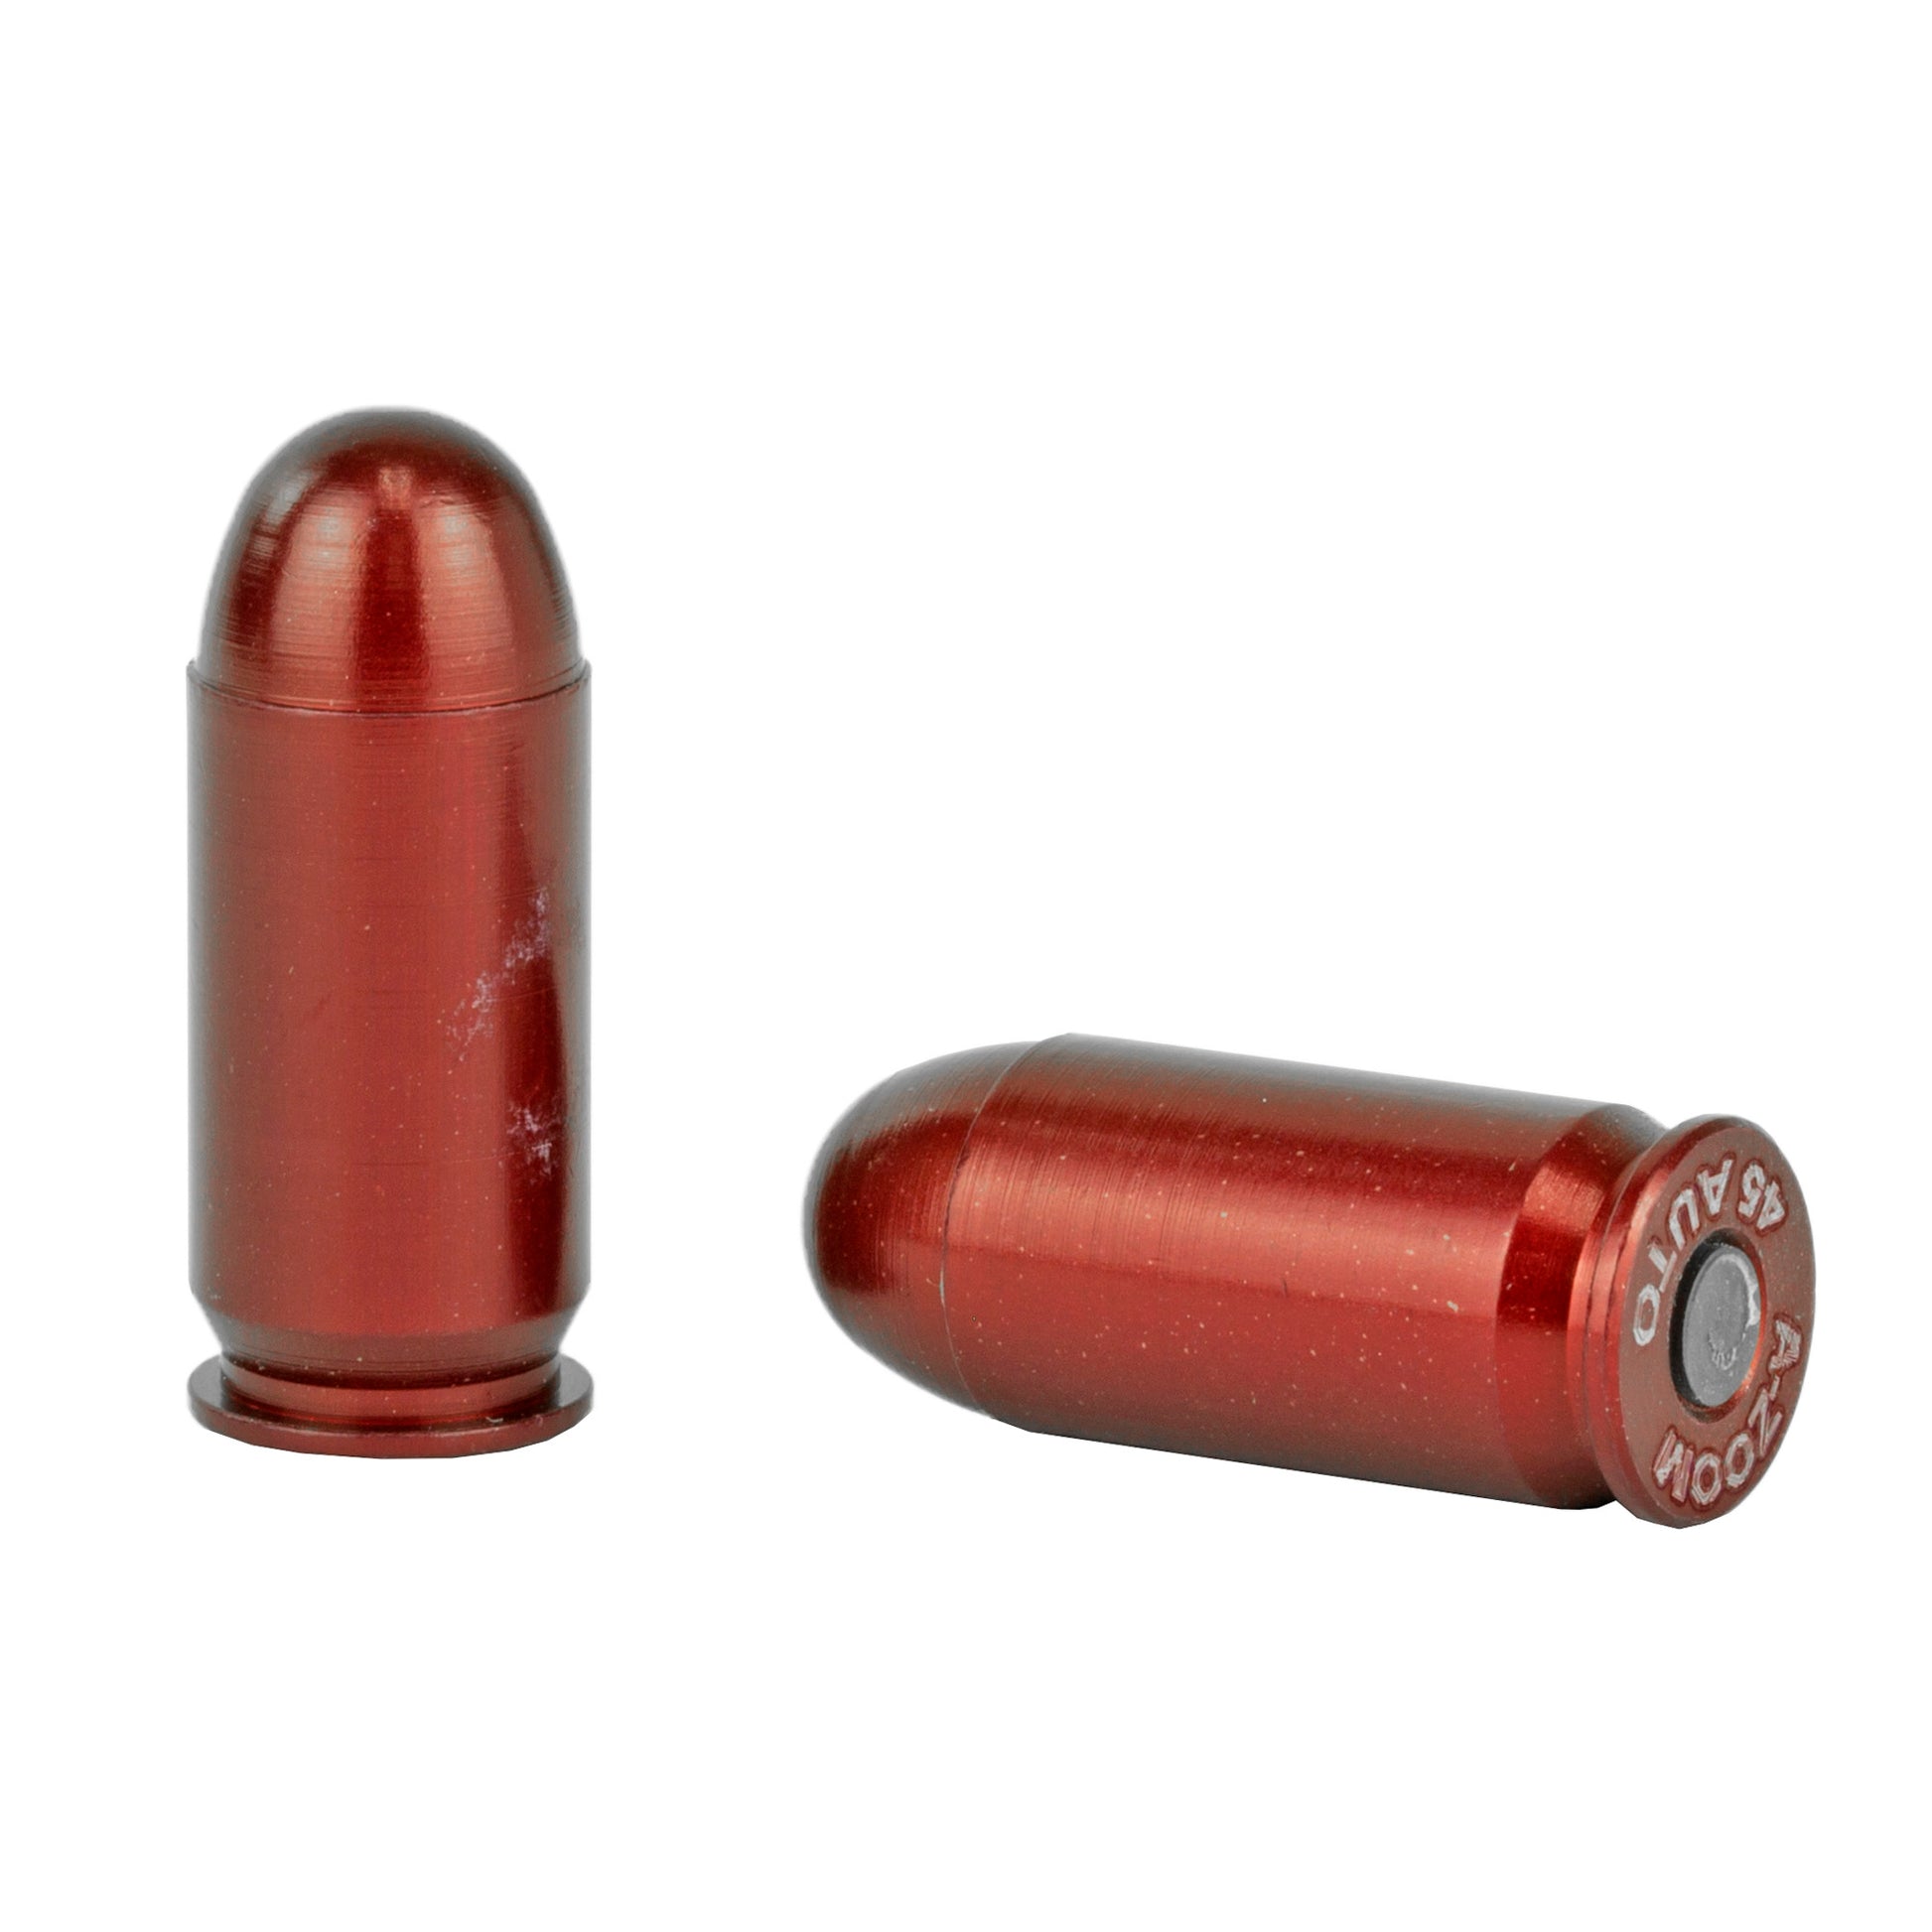 A-Zoom Snap Caps safety training 45 ACP 5 Pack solid aluminum 15115 - California Shooting Supplies